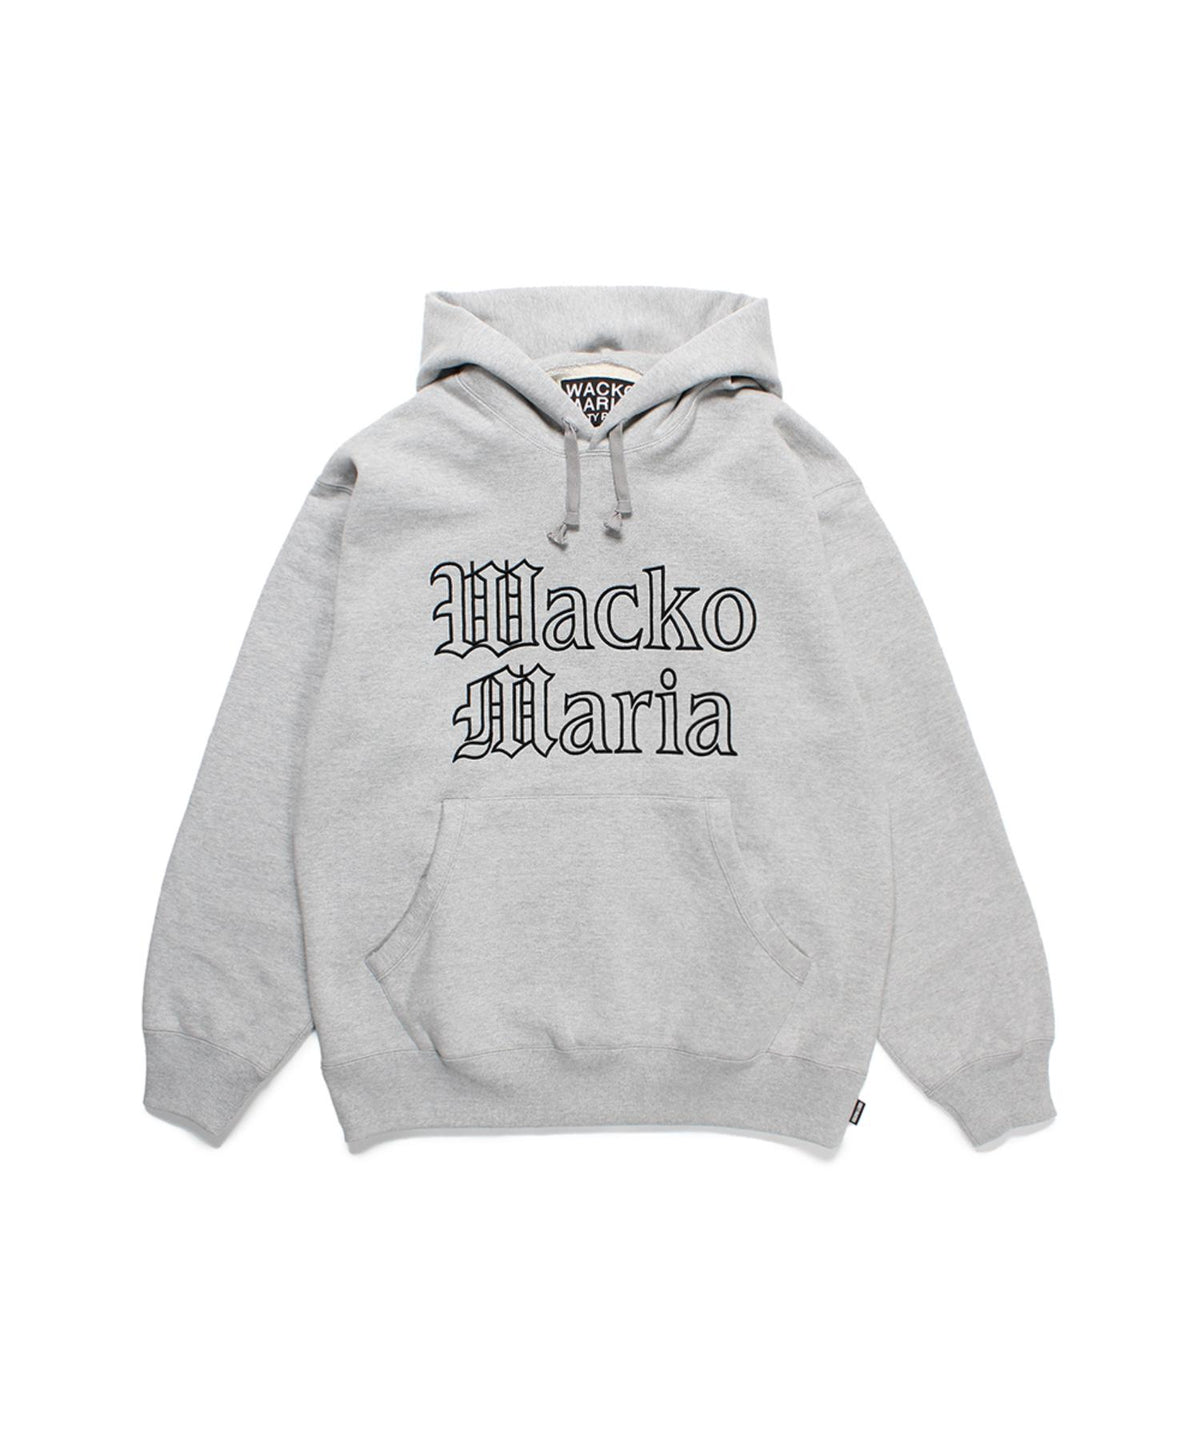 HEAVY WEIGHT PULL OVER HOODED SWEAT SHIRT